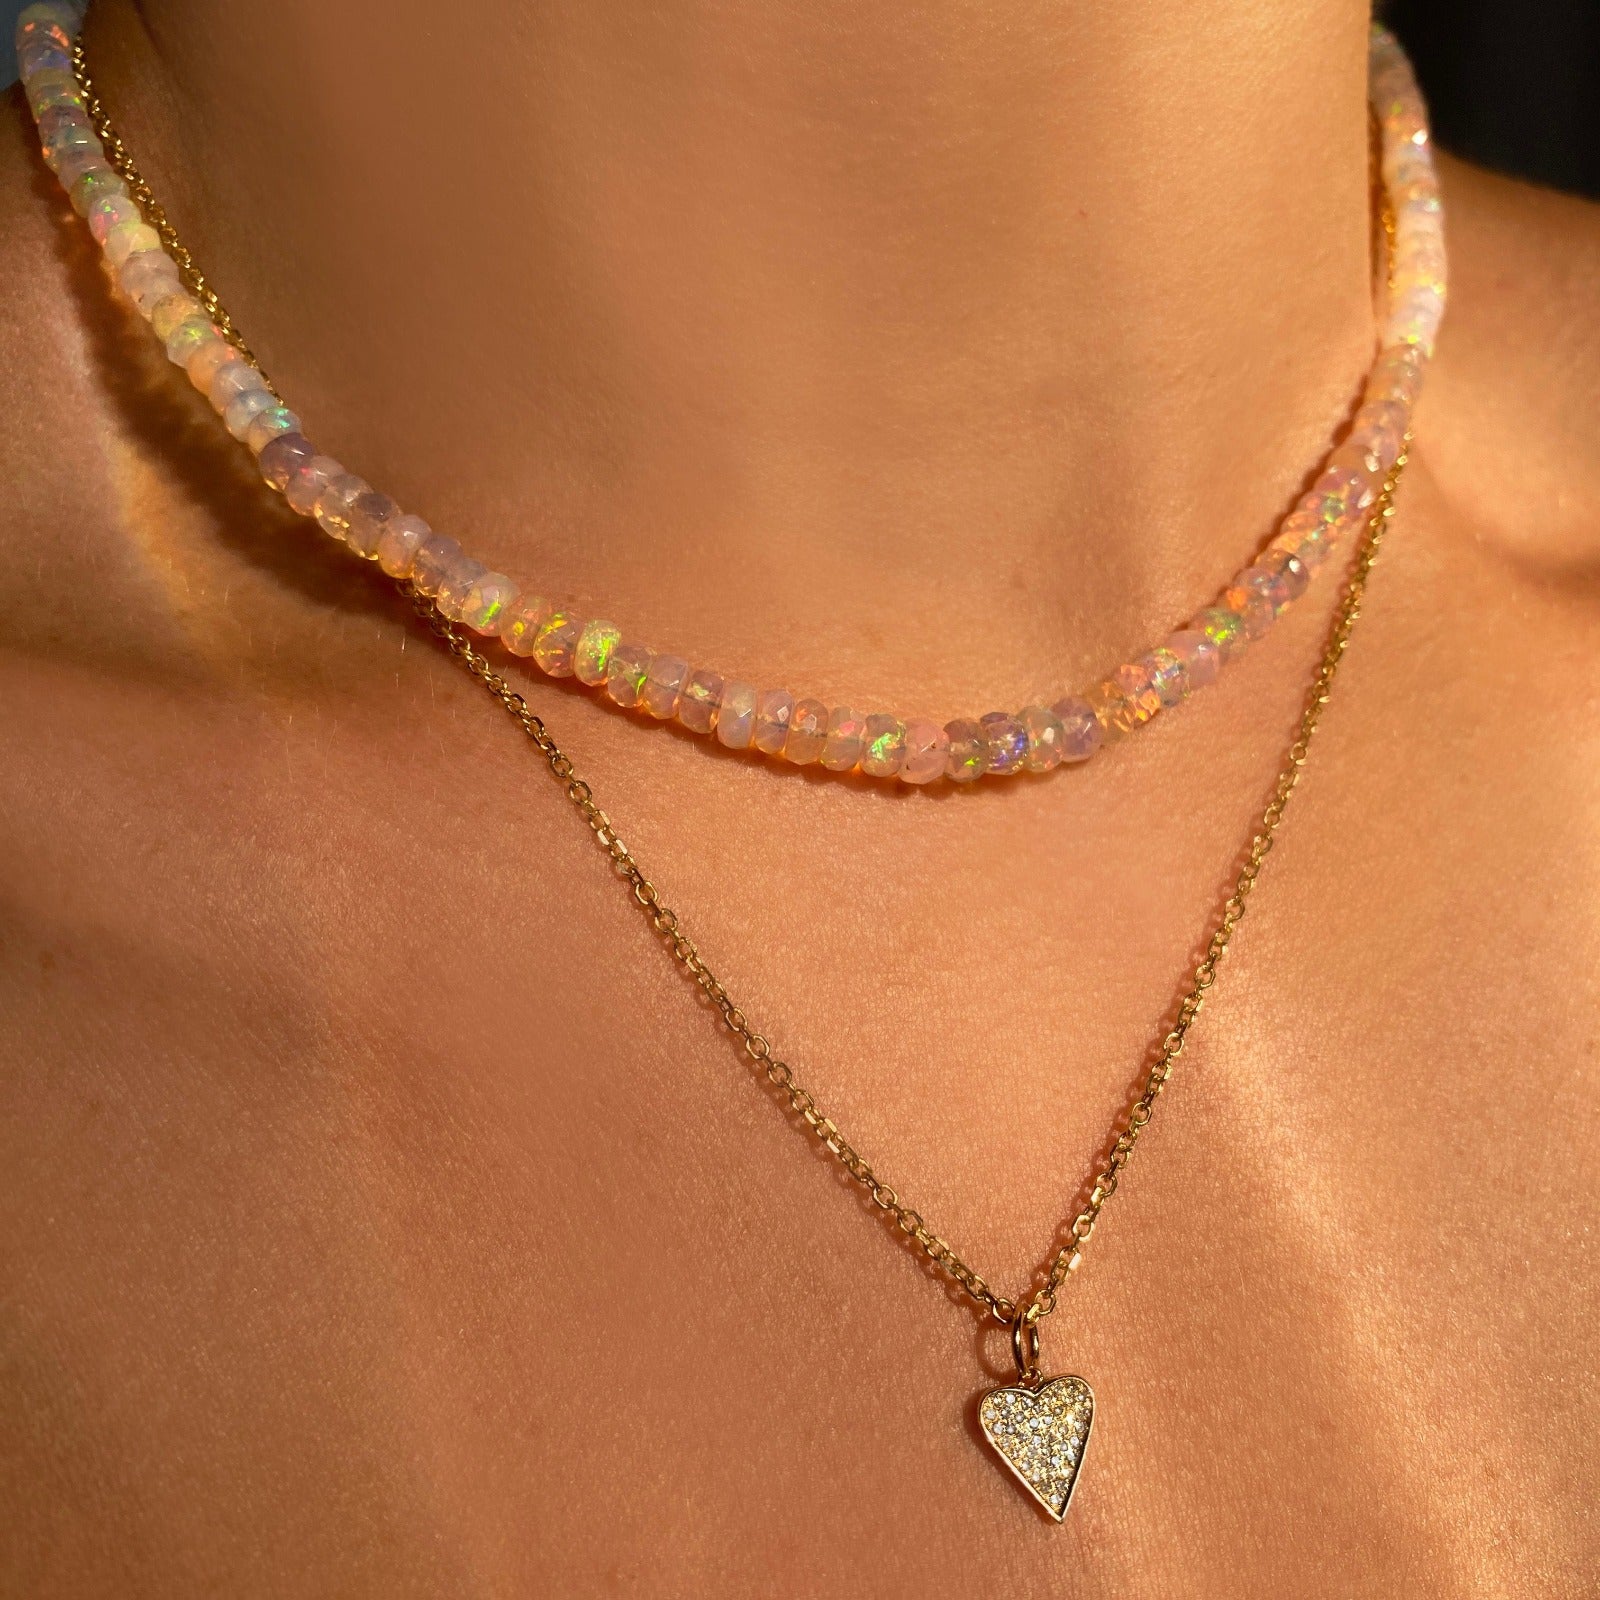 Shimmering beaded necklace made of faceted opals in shades of clear-light pink on a gold linking ovals clasp. Styled on a neck layered with a medium diamond pave heart charm.